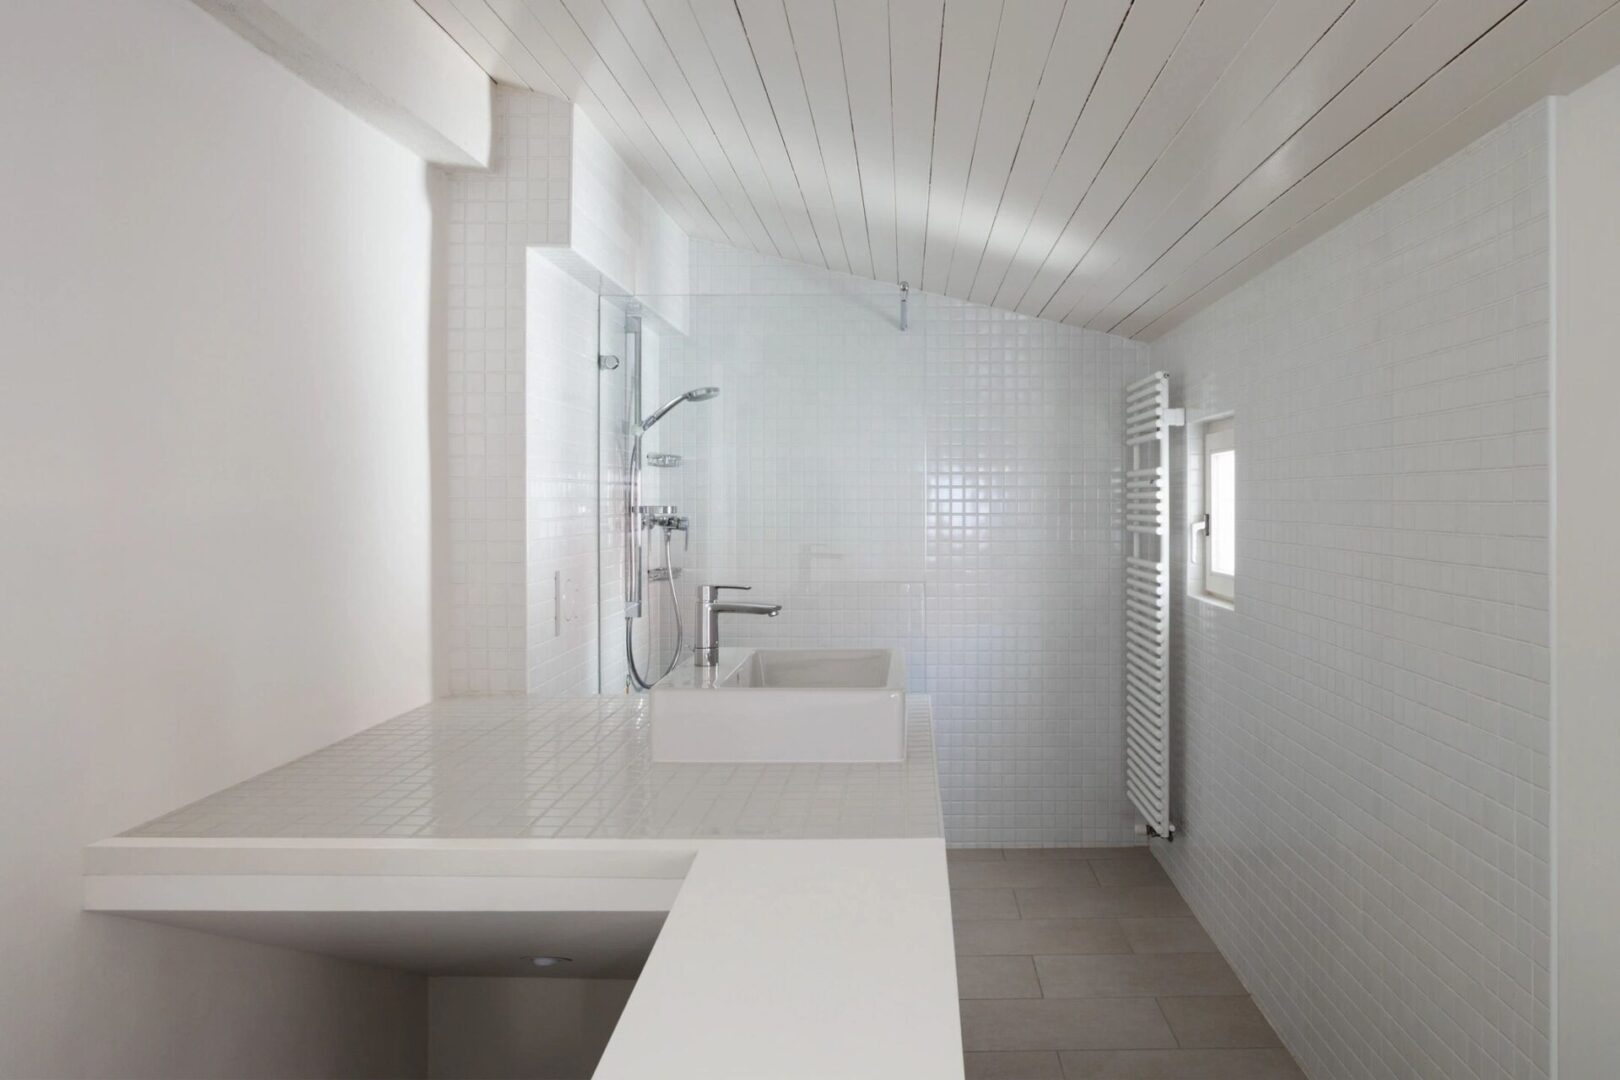 A bathroom with white walls and floors.